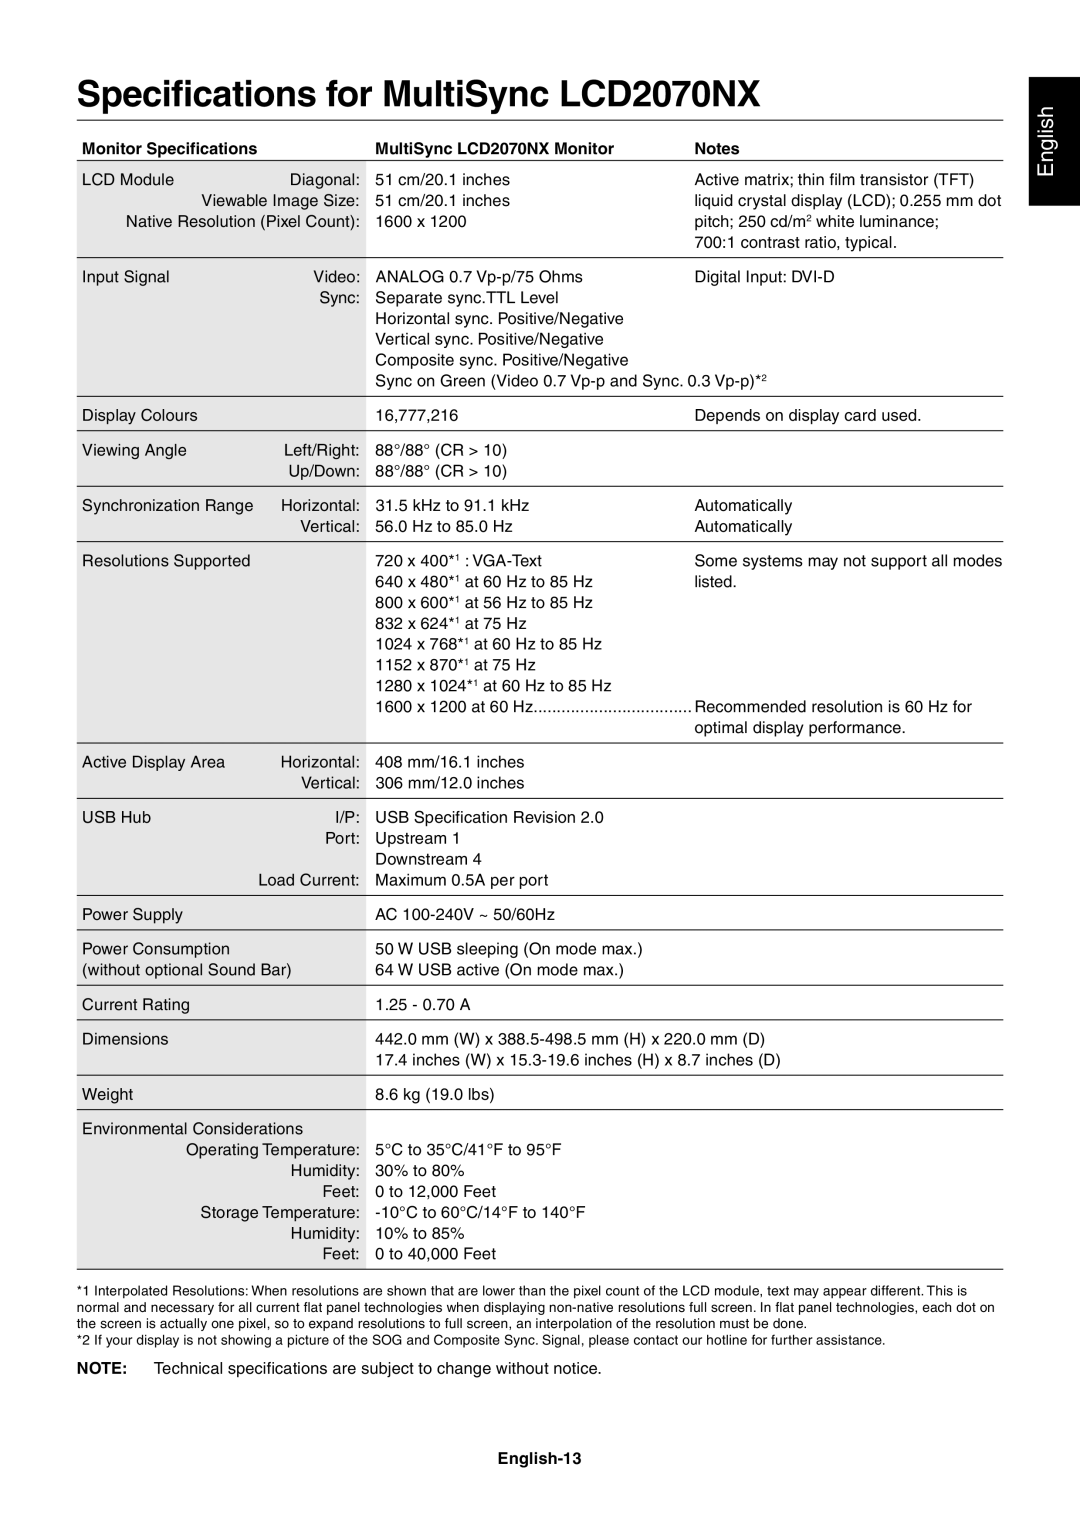 NEC user manual Specifications for MultiSync LCD2070NX, English 